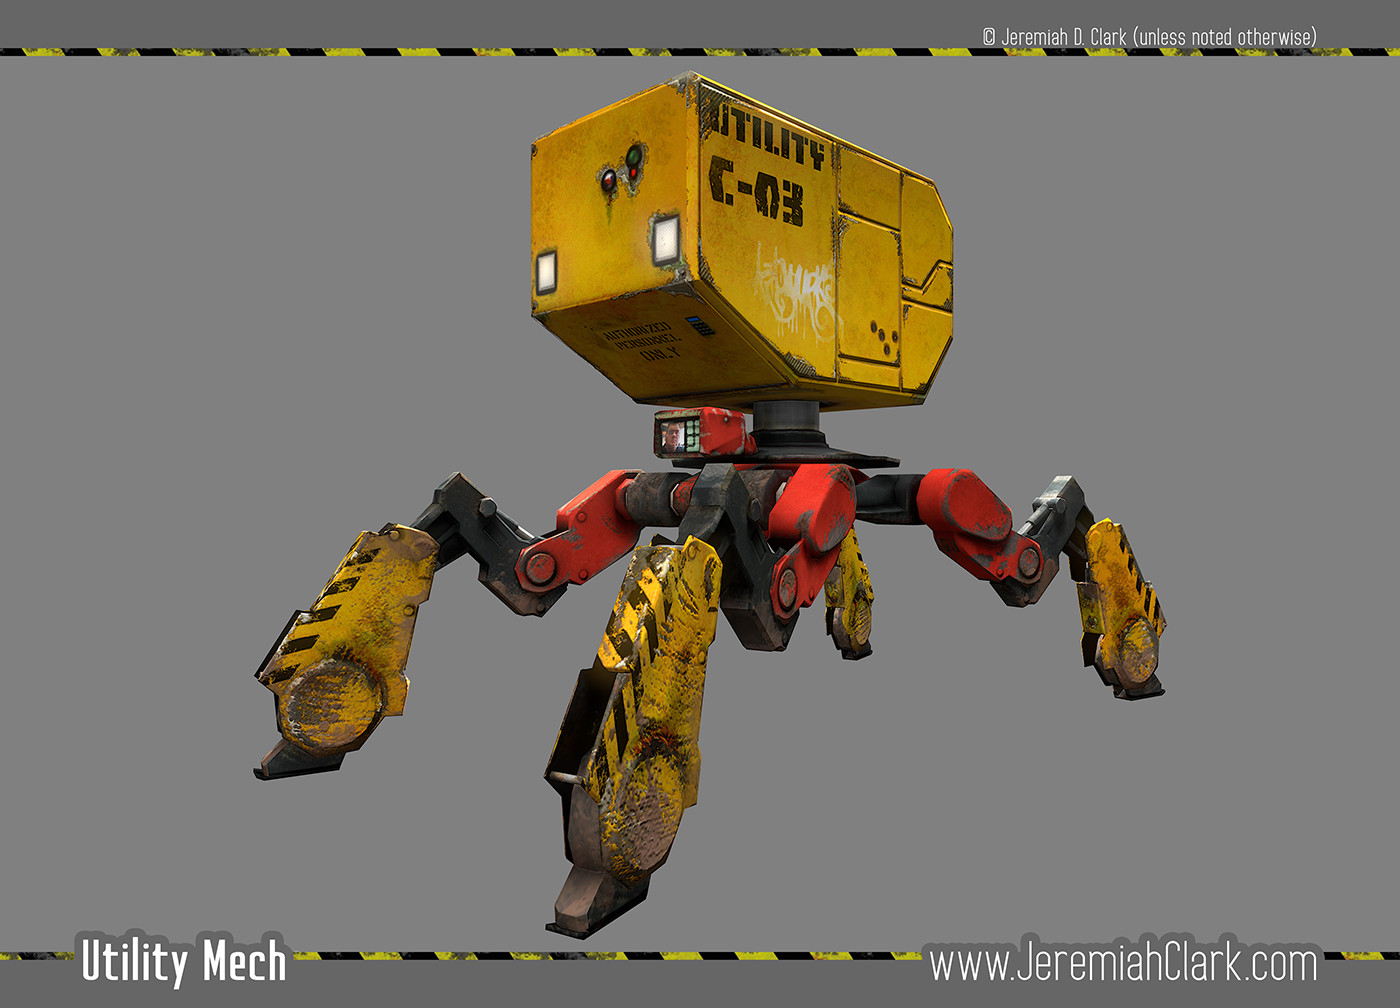 Utility Mech - Capture from Marmoset Toolbag 2